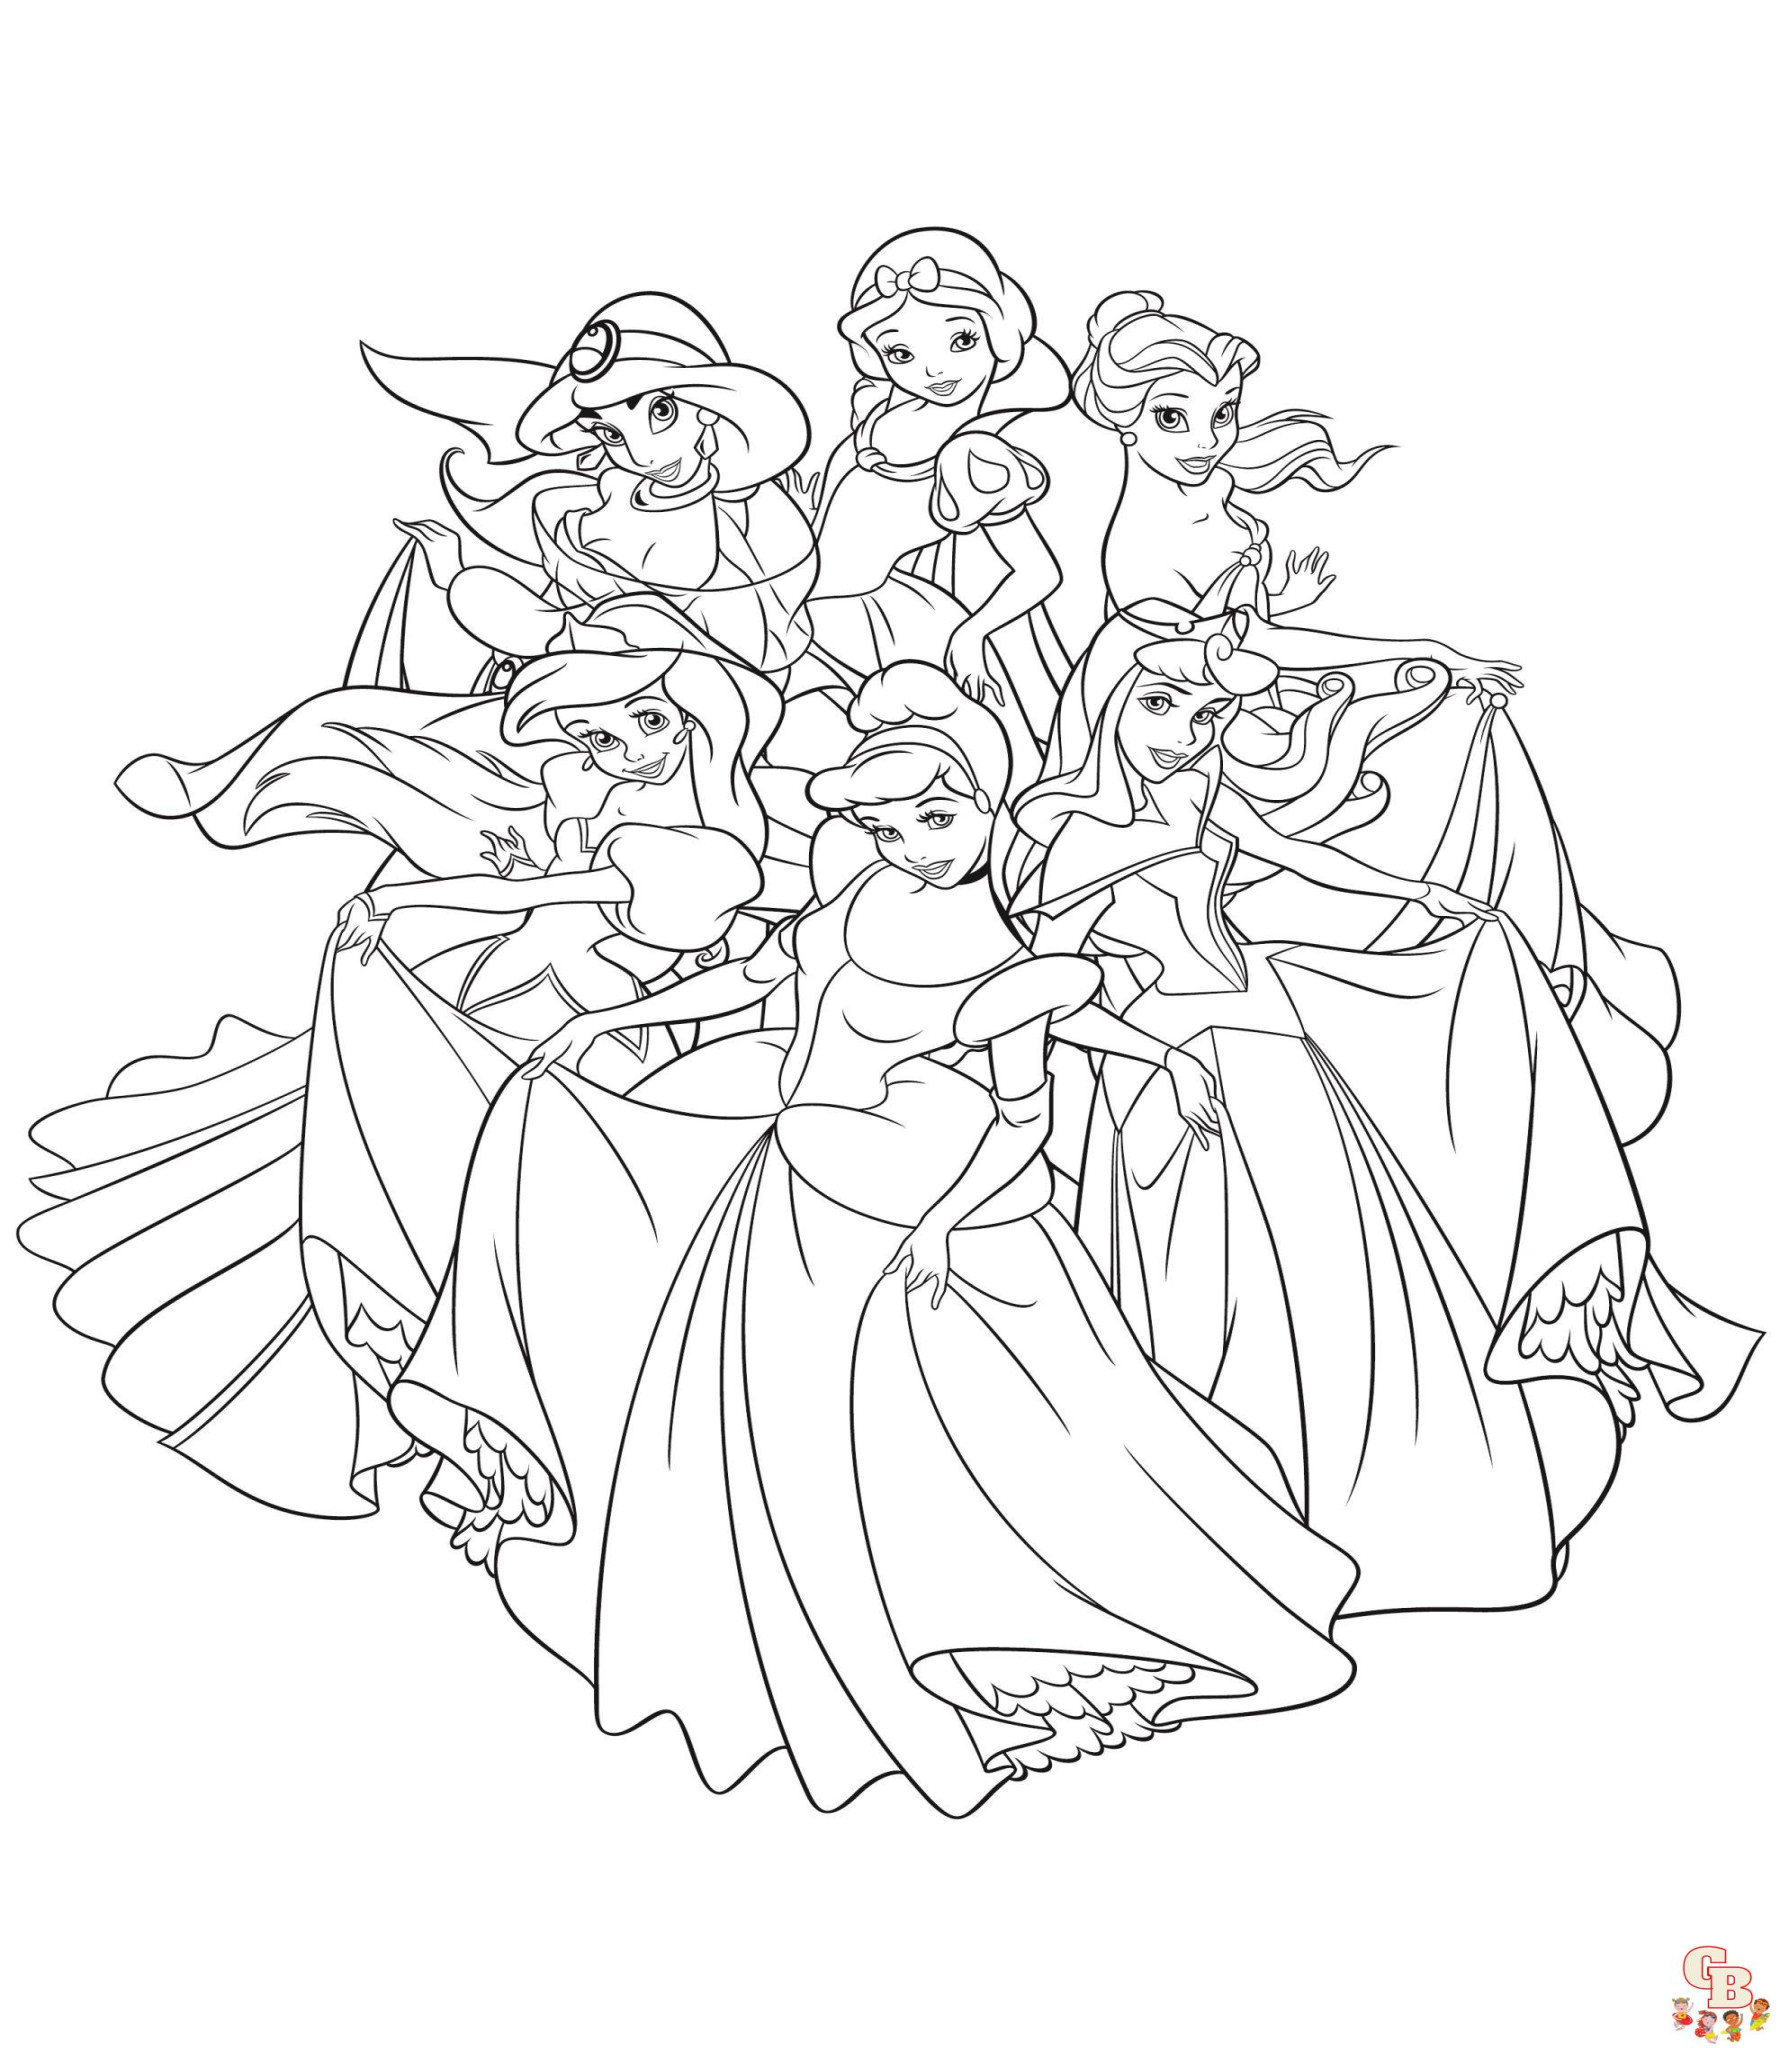 Disney Princess Coloring Pages Printable, Free, and Easy for Kids